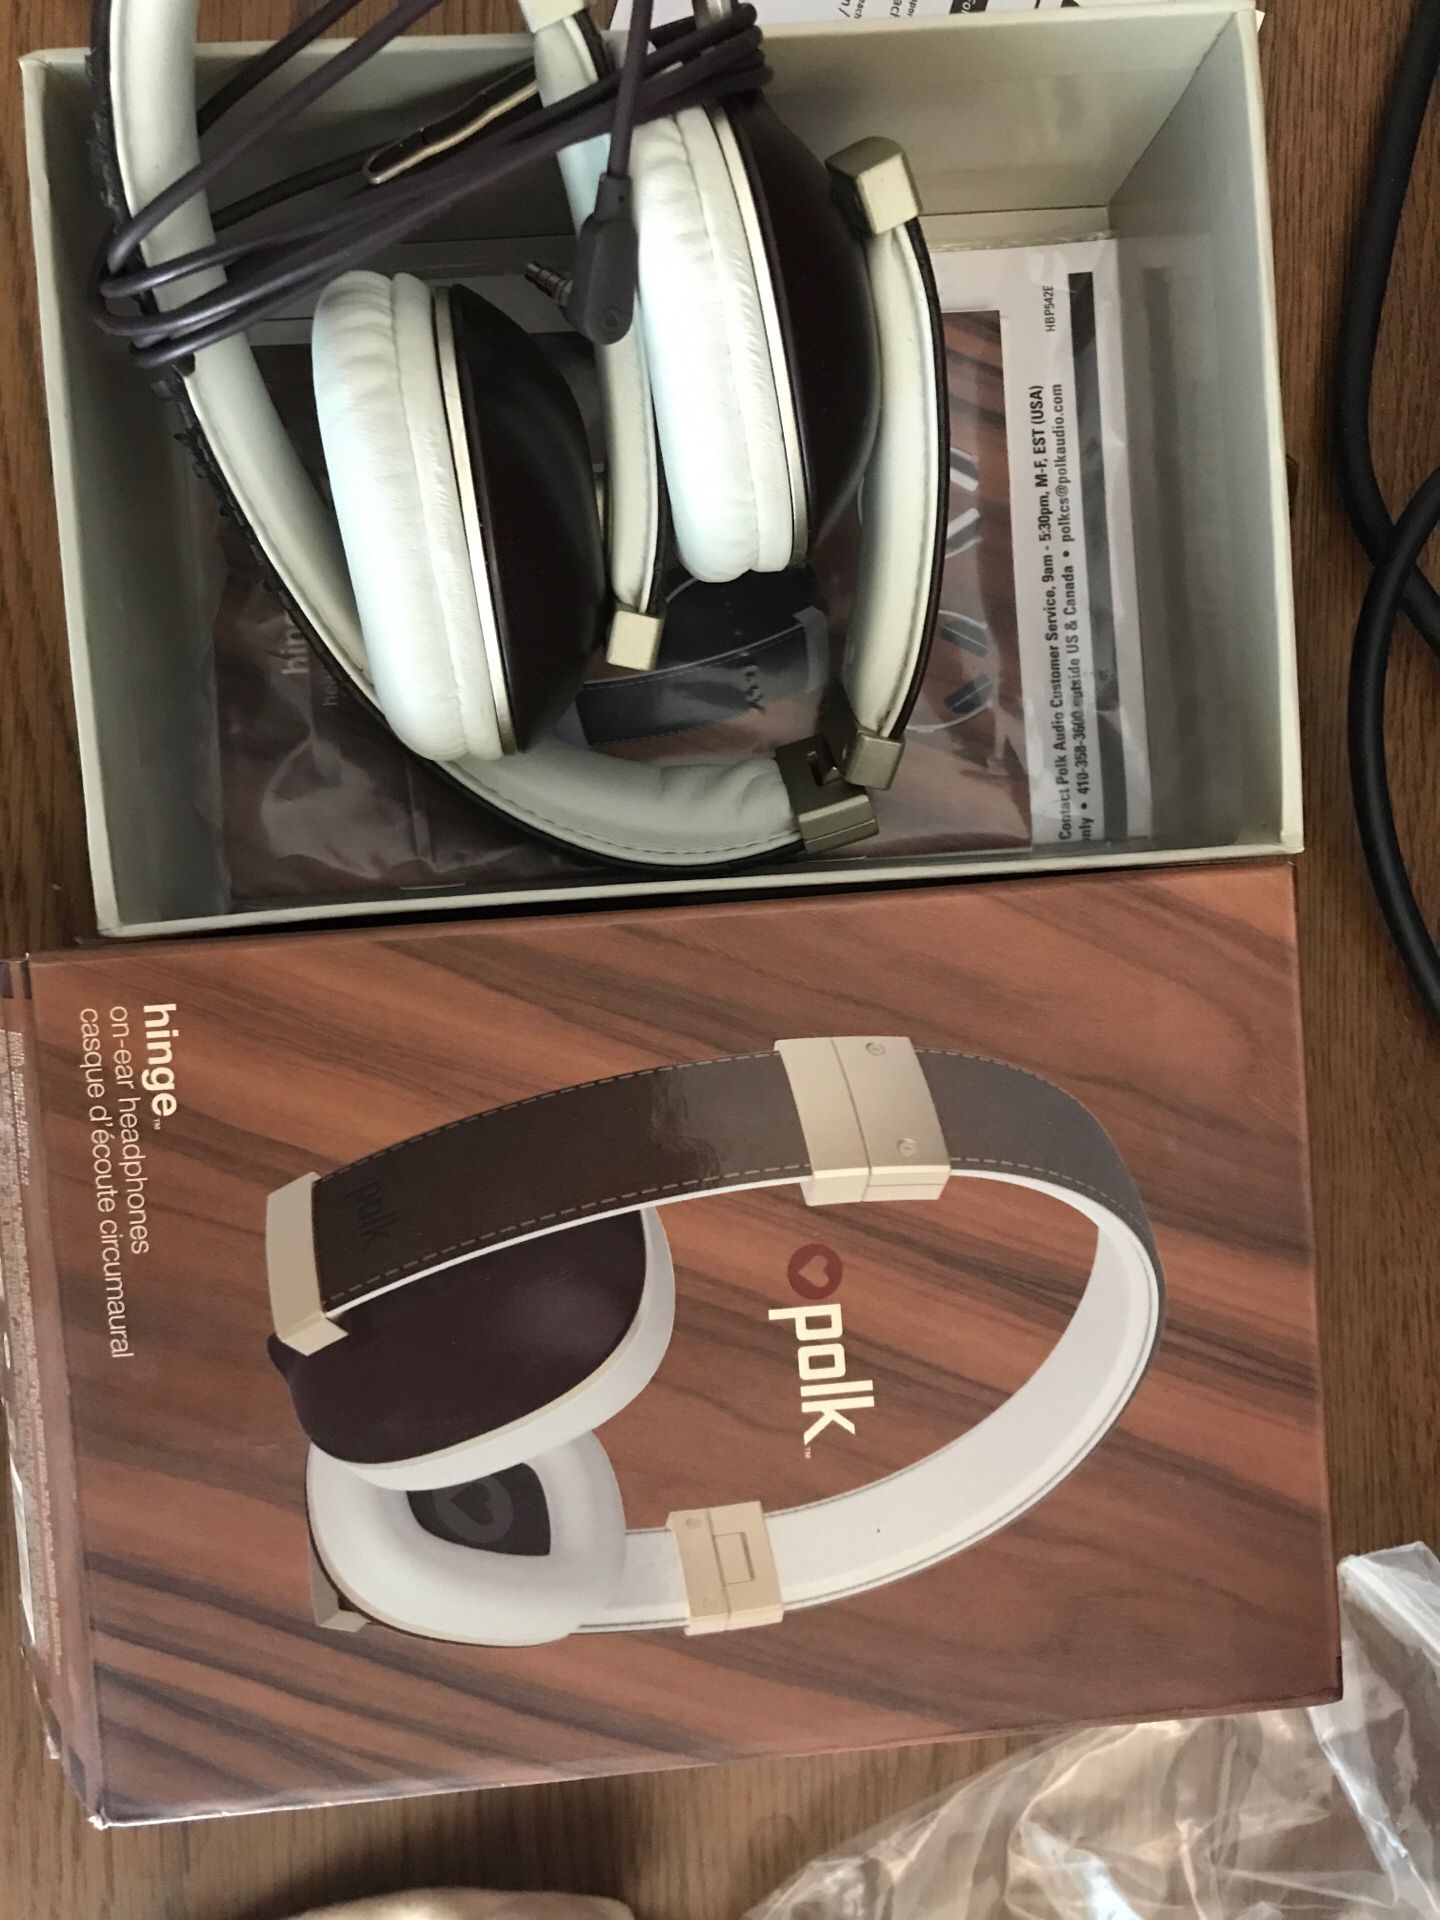 Polk Audio Hinge on-ear headphones with box and pouch